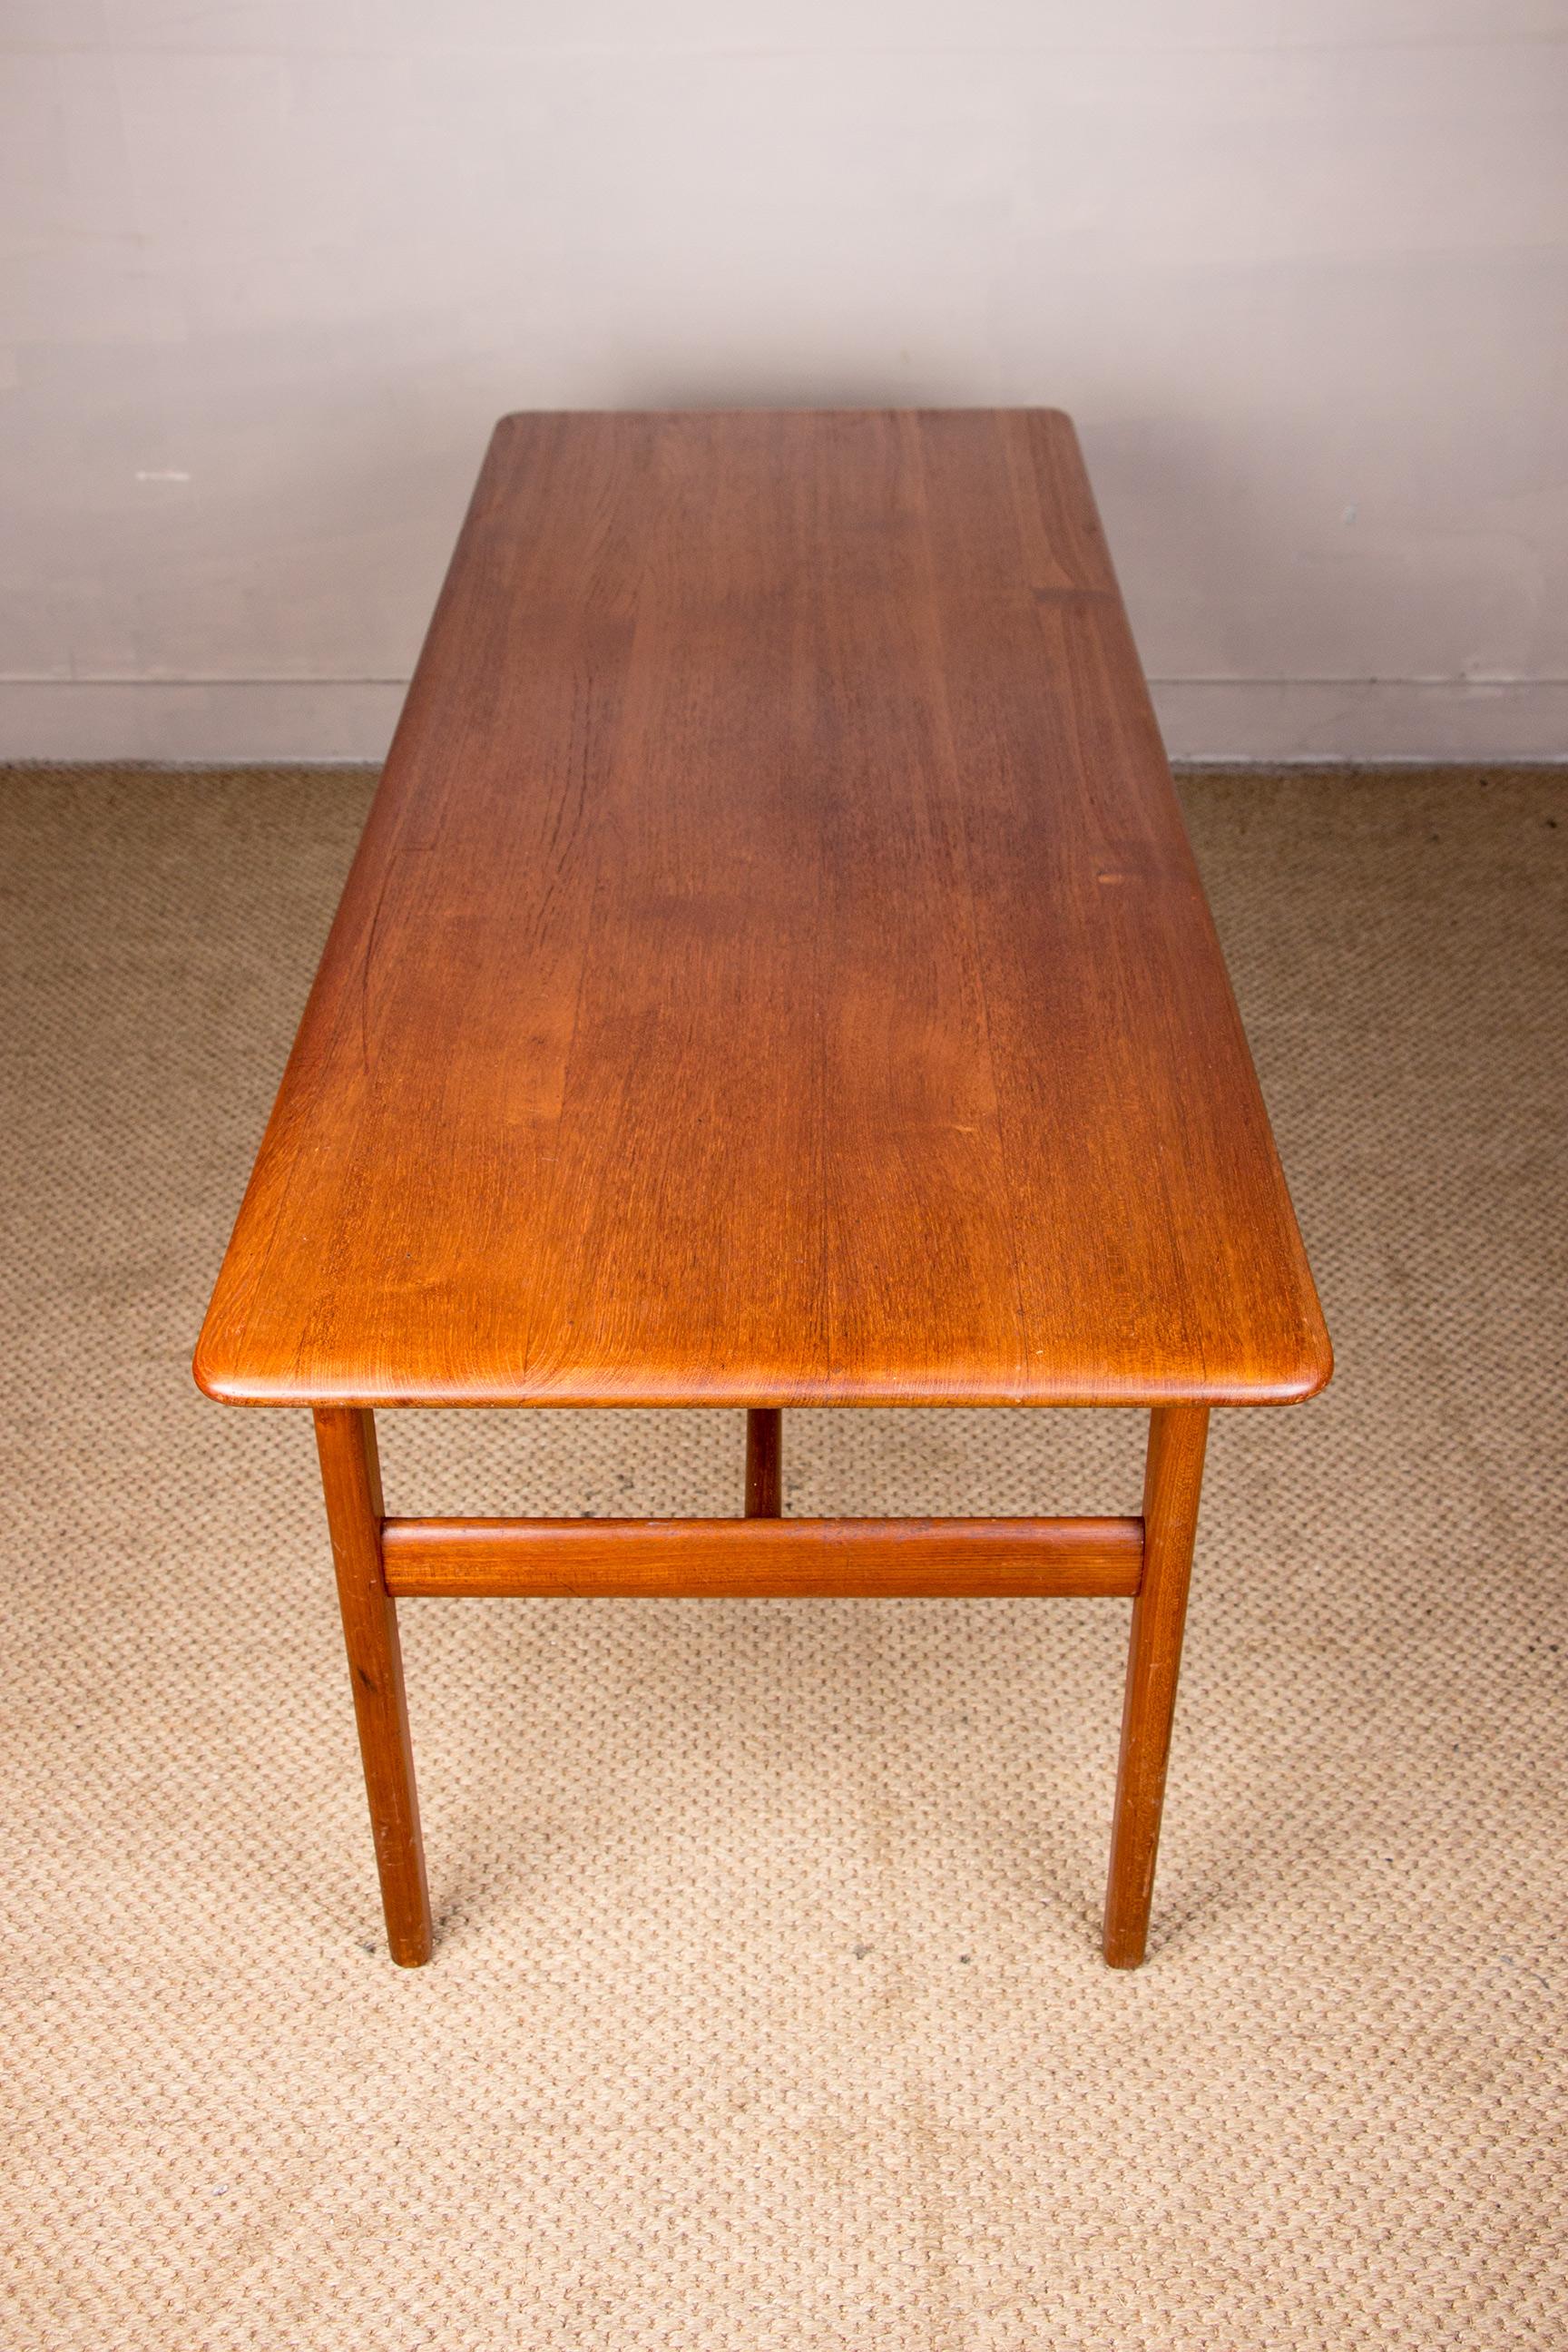 Large Danish Coffee Table in Teak with Document Ranges, 1960 For Sale 8